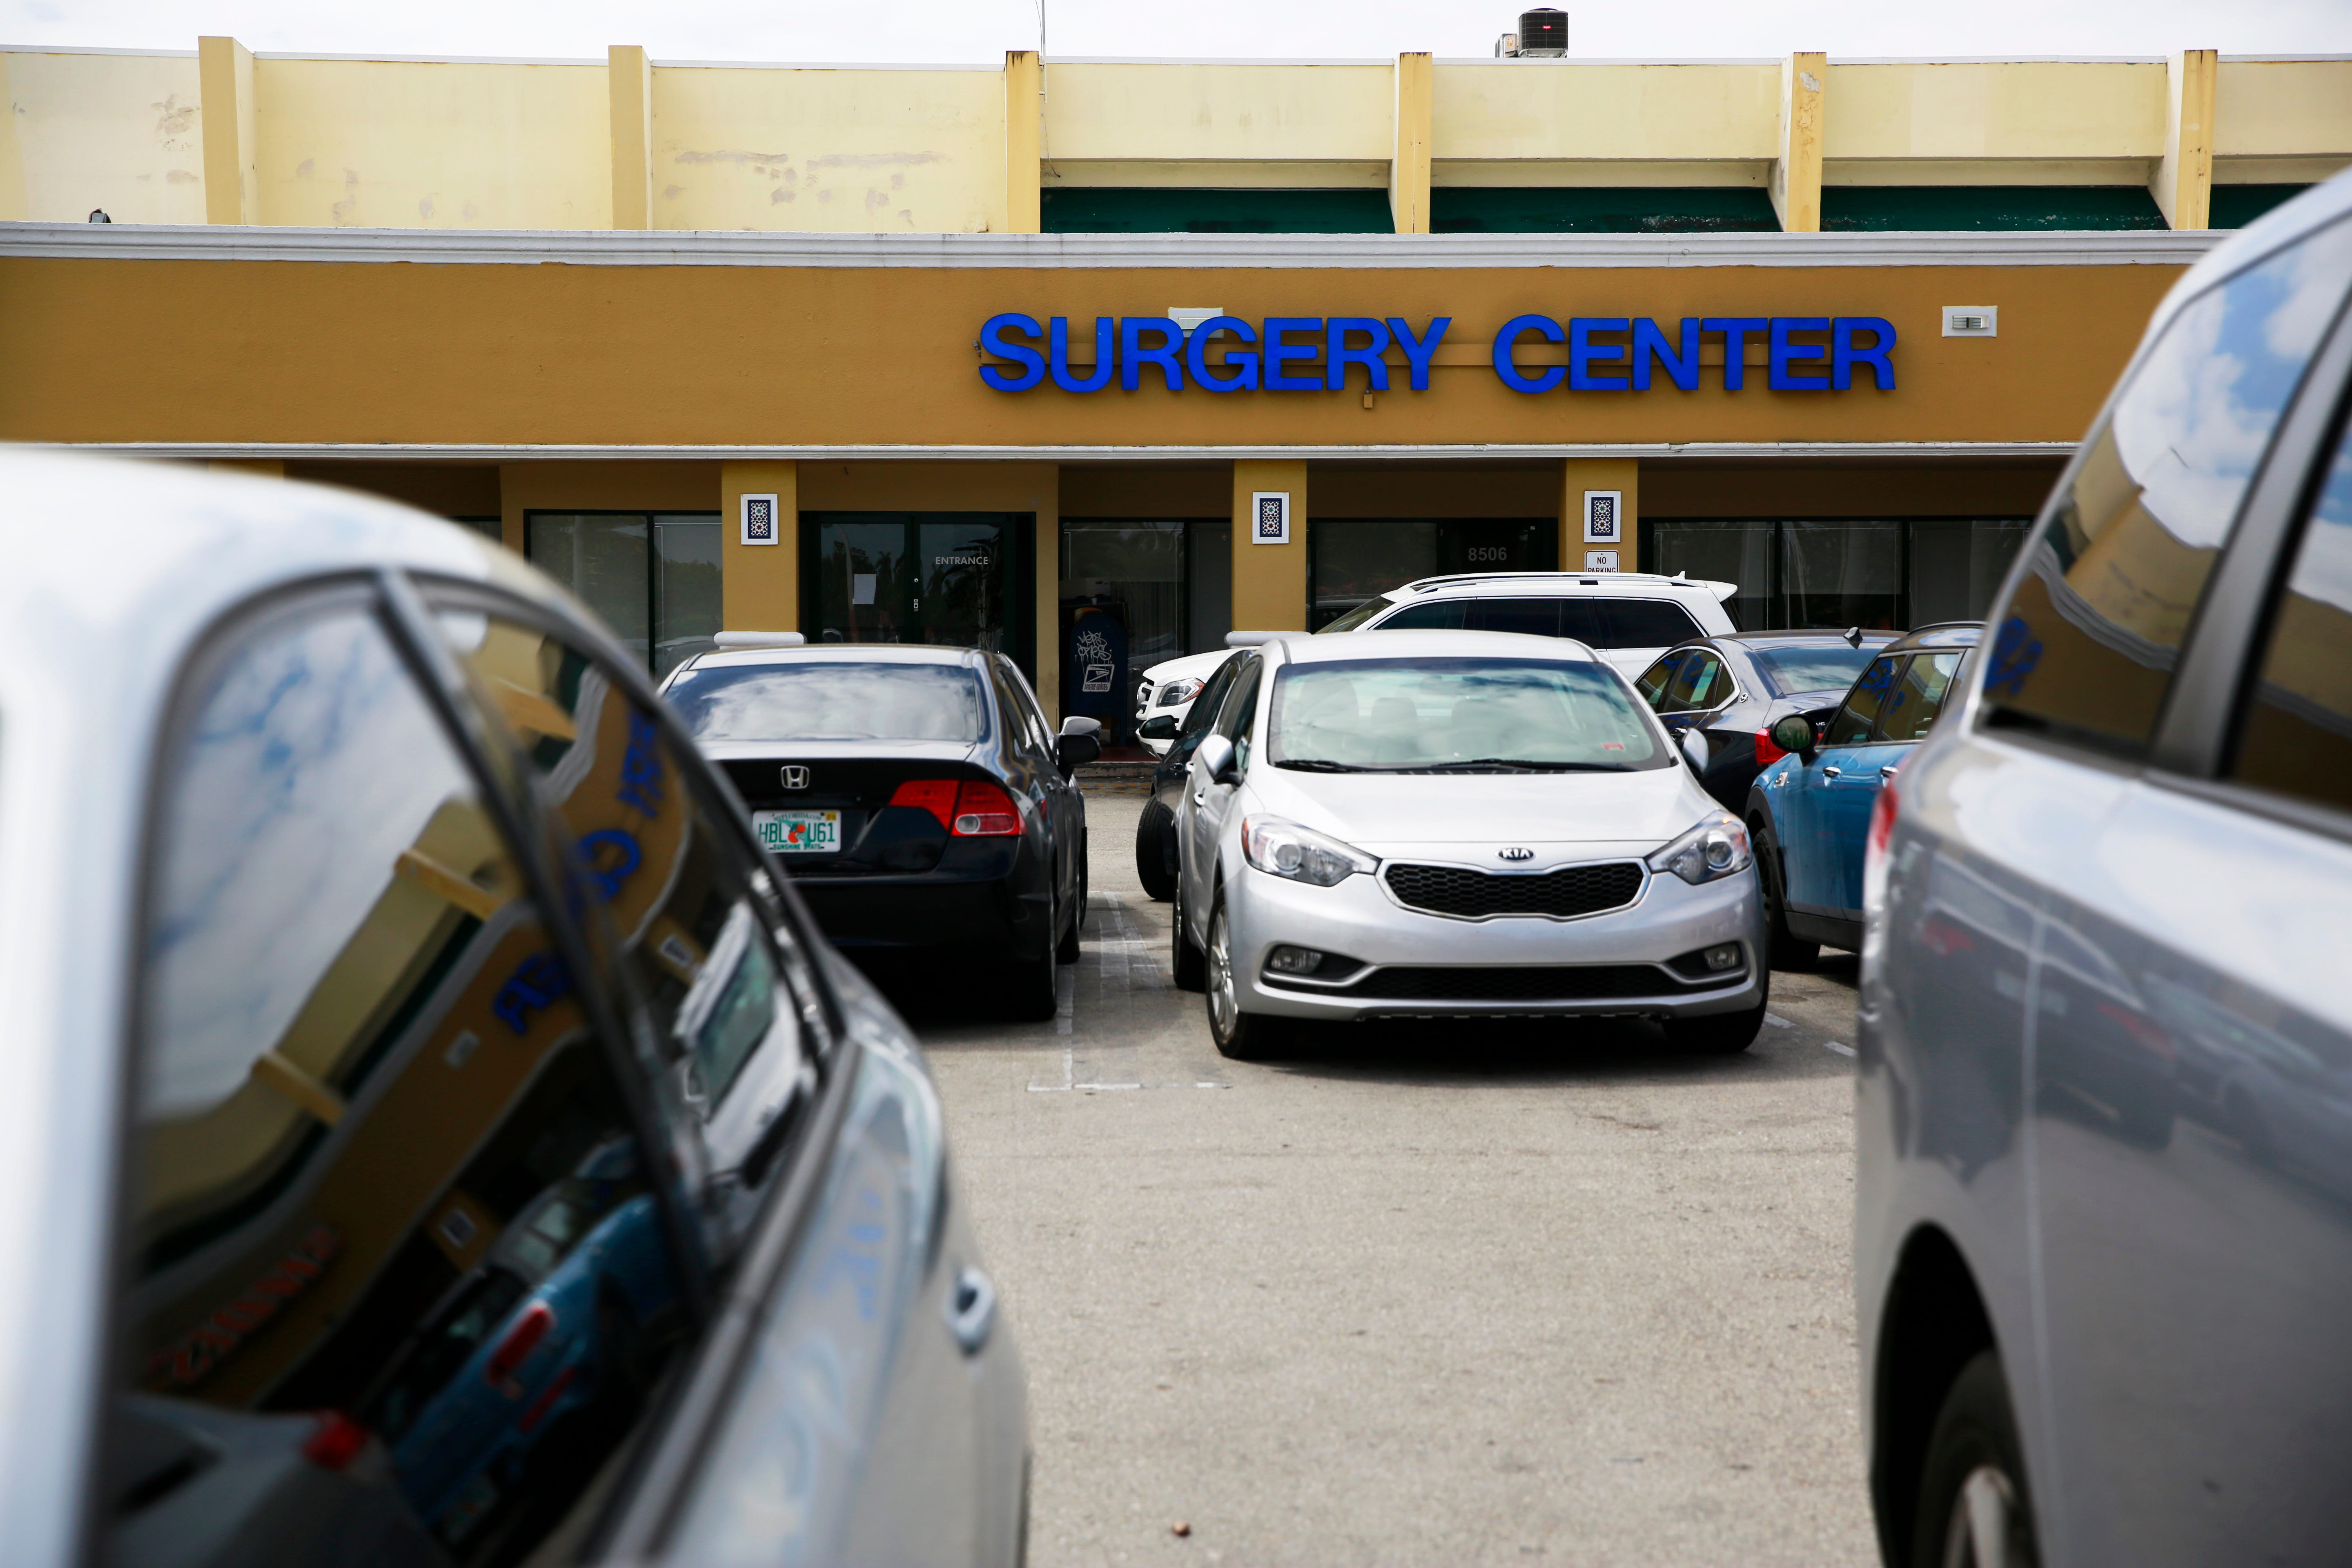 This cosmetic surgery facility in suburban Miami has undergone name changes over the years, but one person has been at the center: Dr. Ismael Labrador. Tucked away in a strip mall between a barber shop and a discount shoe store, the facility carries out popular but risky procedures that have resulted in numerous deaths and injuries since 2013.